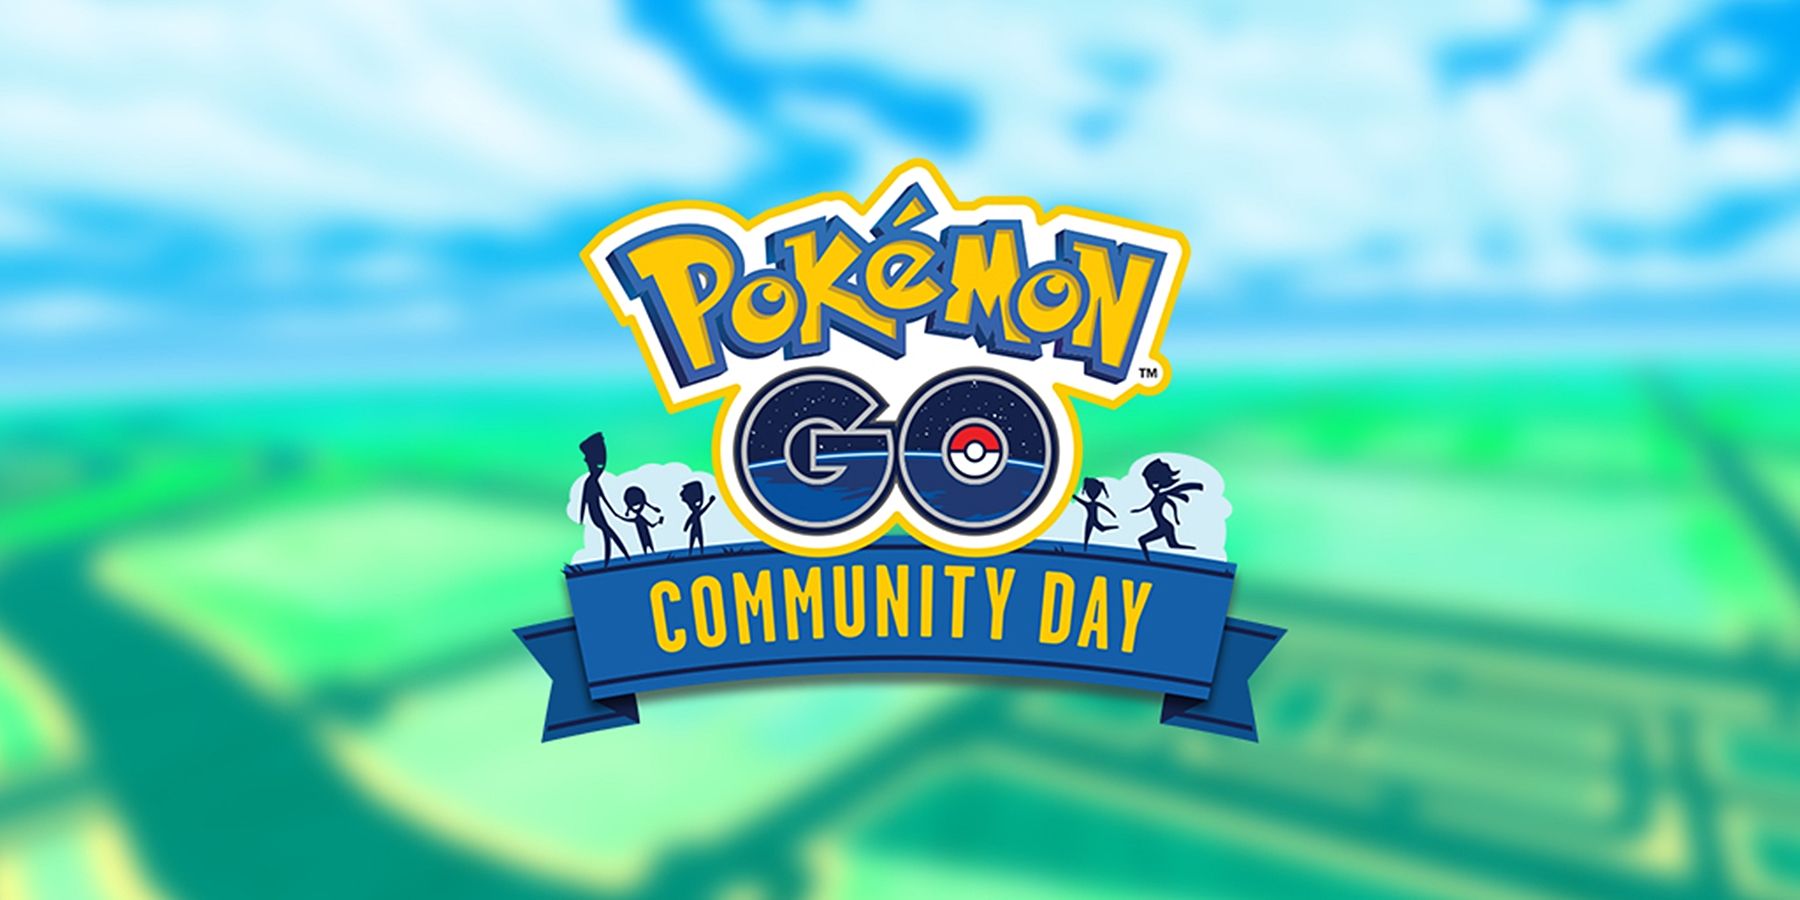 Pokemon GO Confirms Community Day Dates for September, October, and